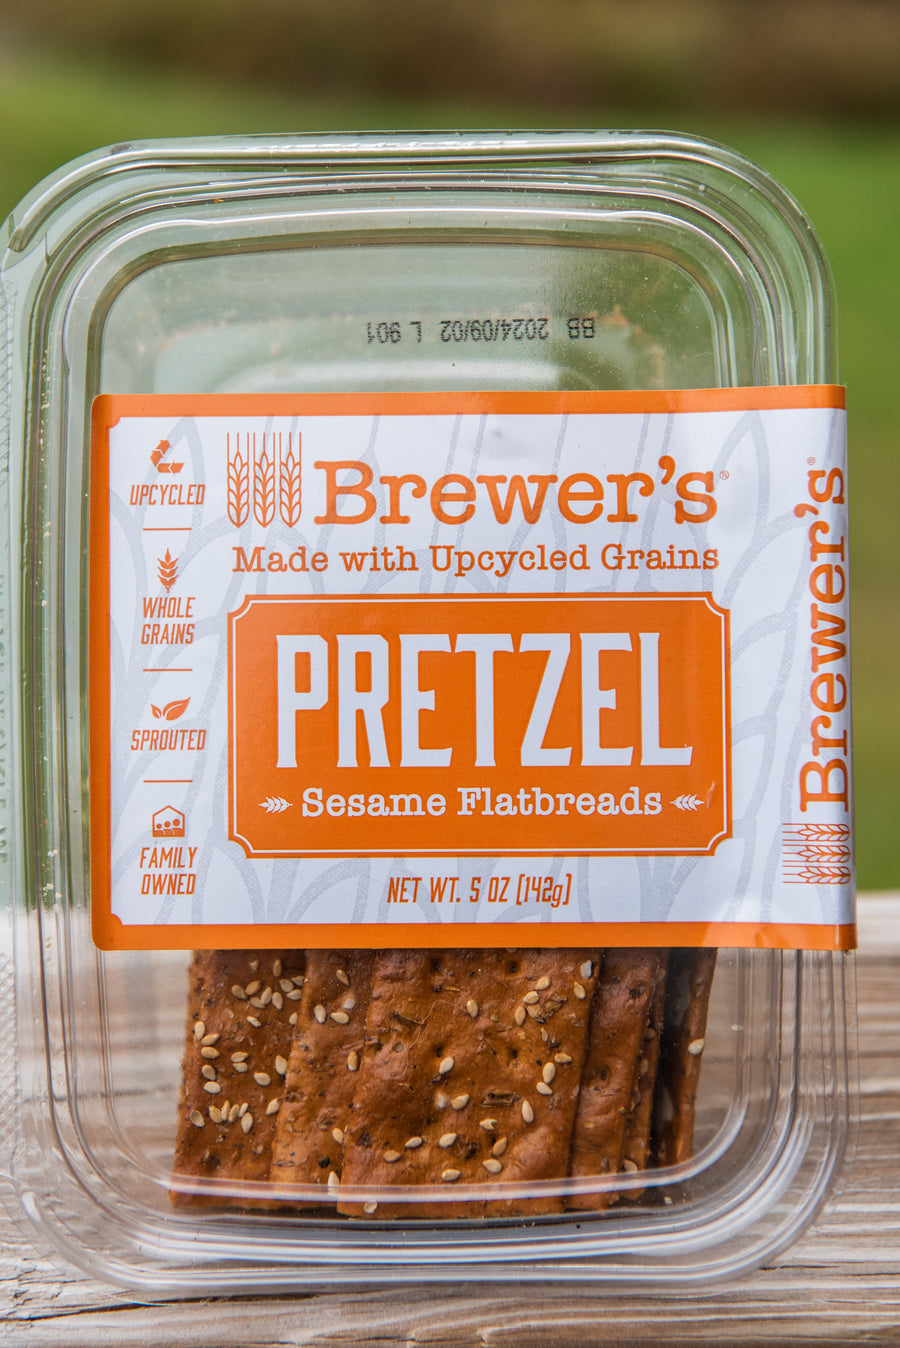 Brewer's Pretzel Flatbreads made with Upcycled Grains